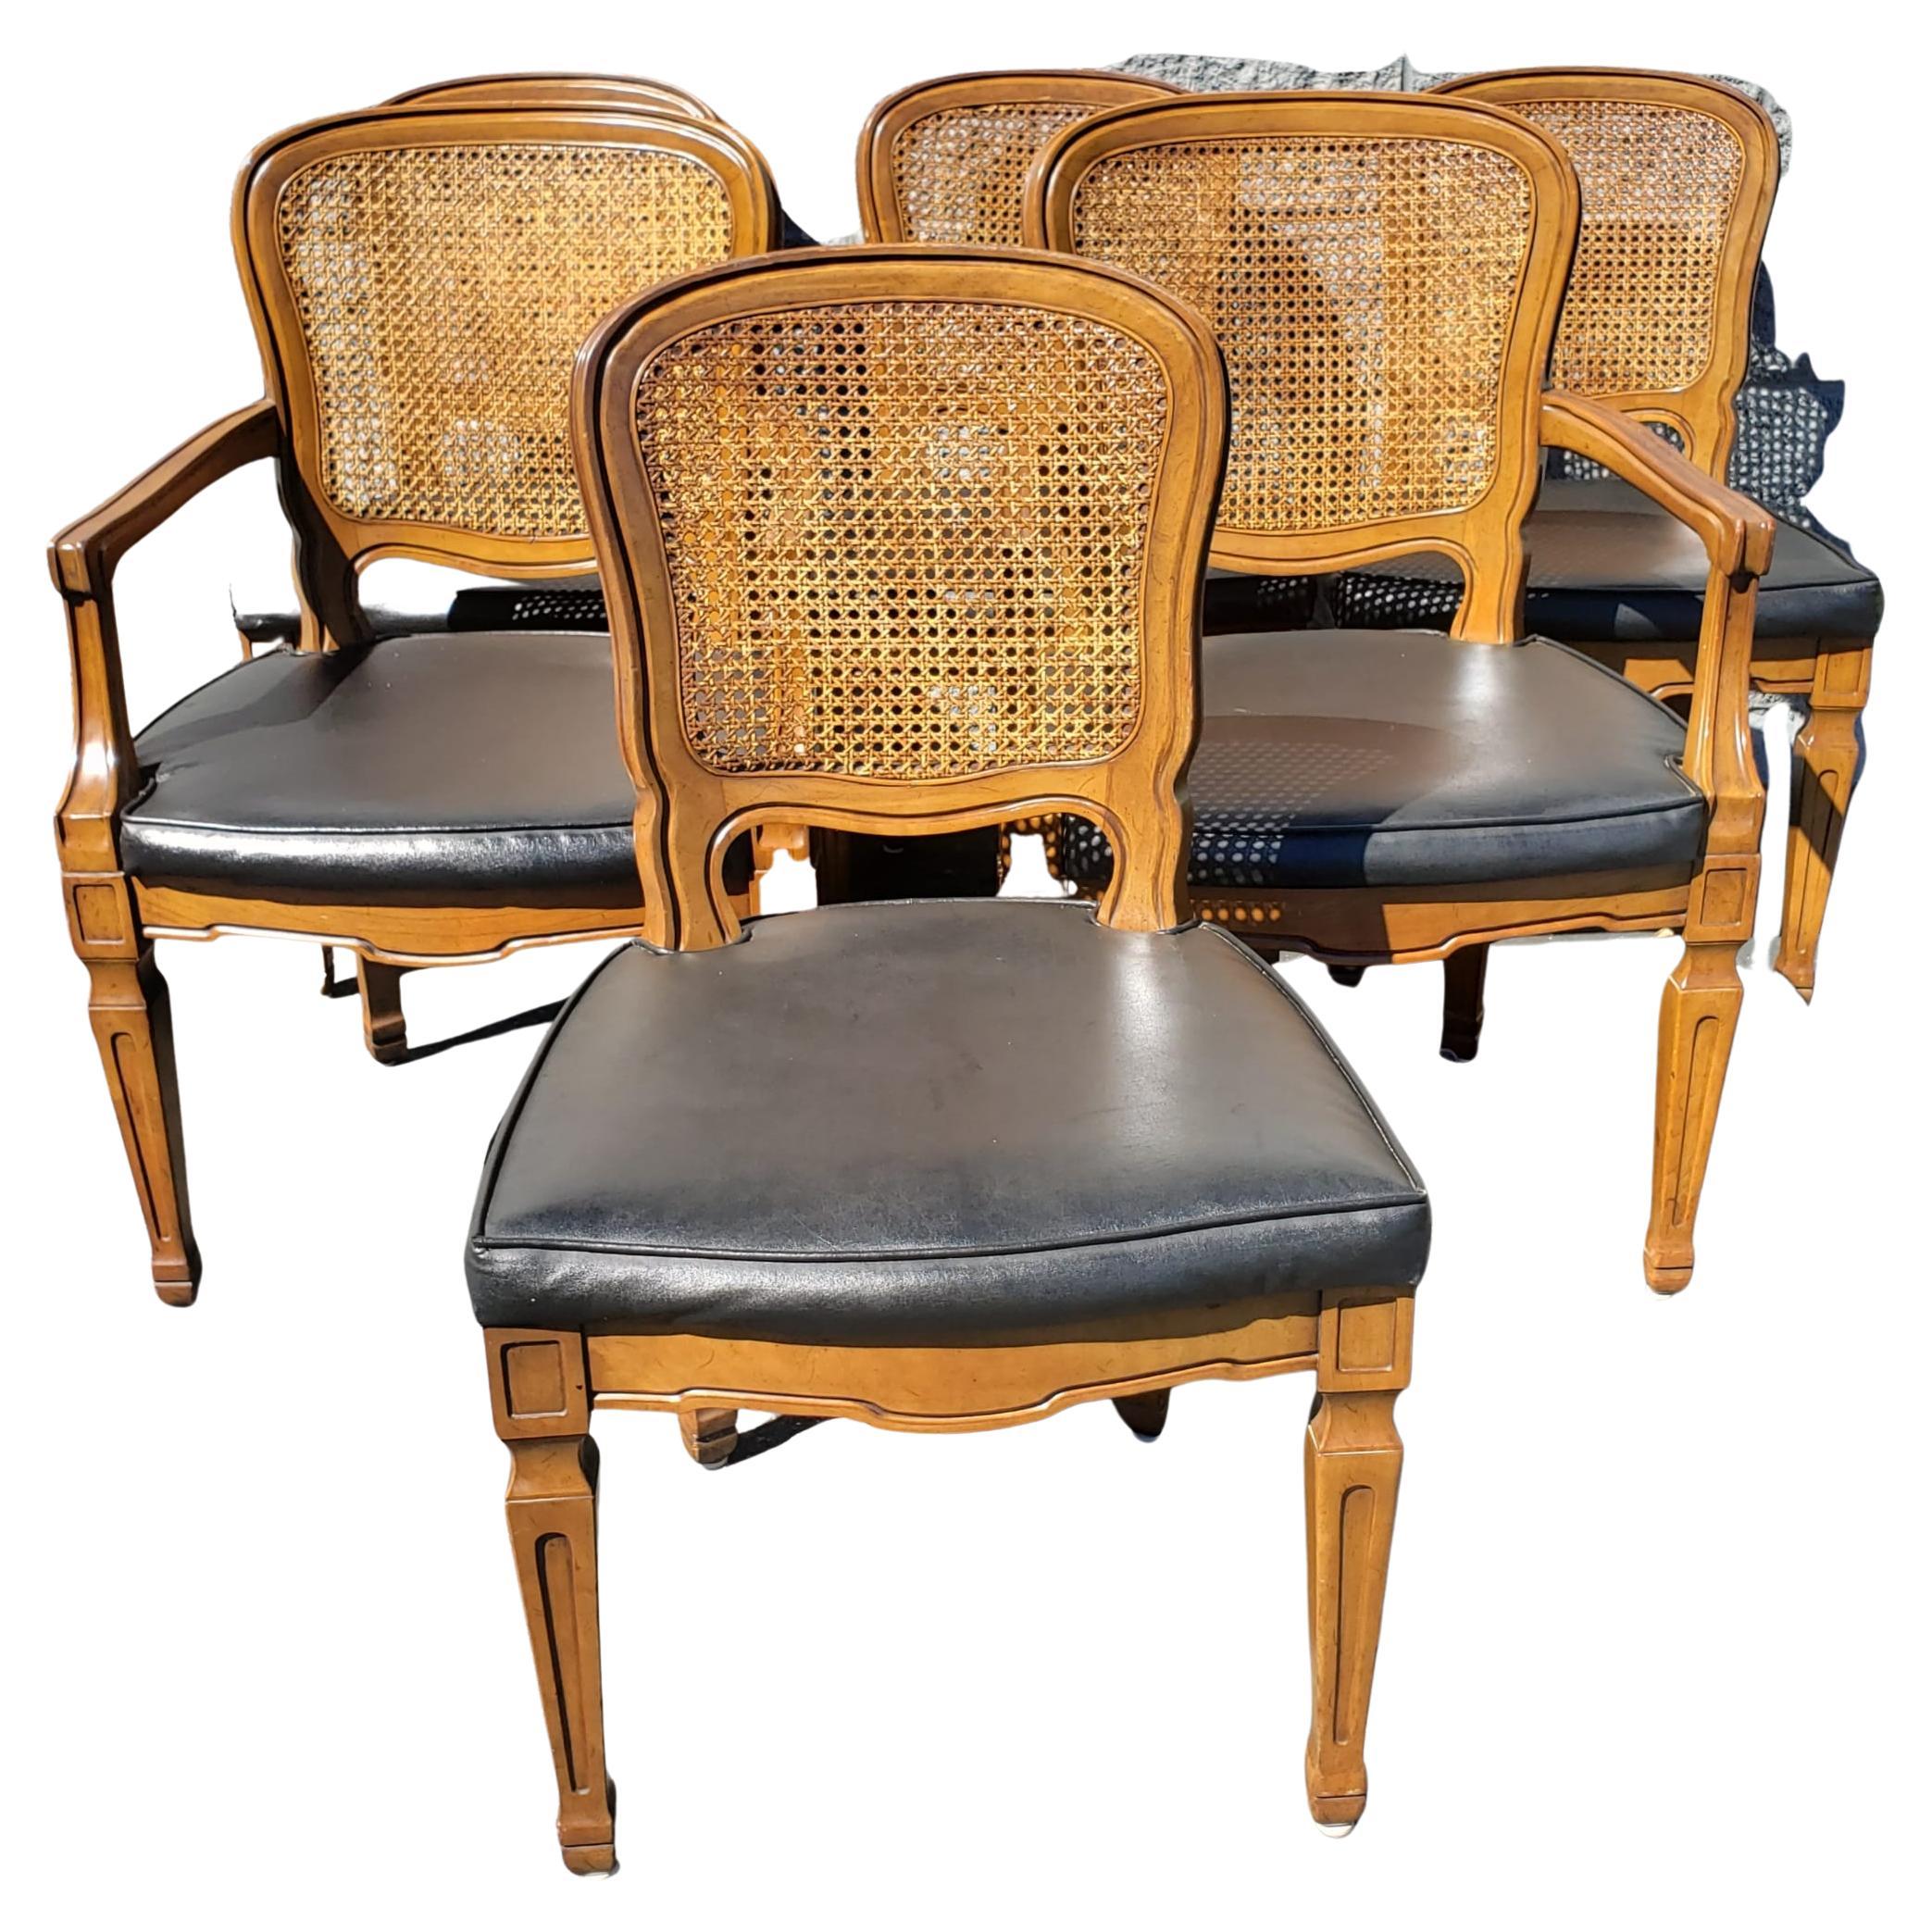 20th Century Henredon French Country Cane Back w/ Leatherette Seats Dining Chairs, C 1960s For Sale